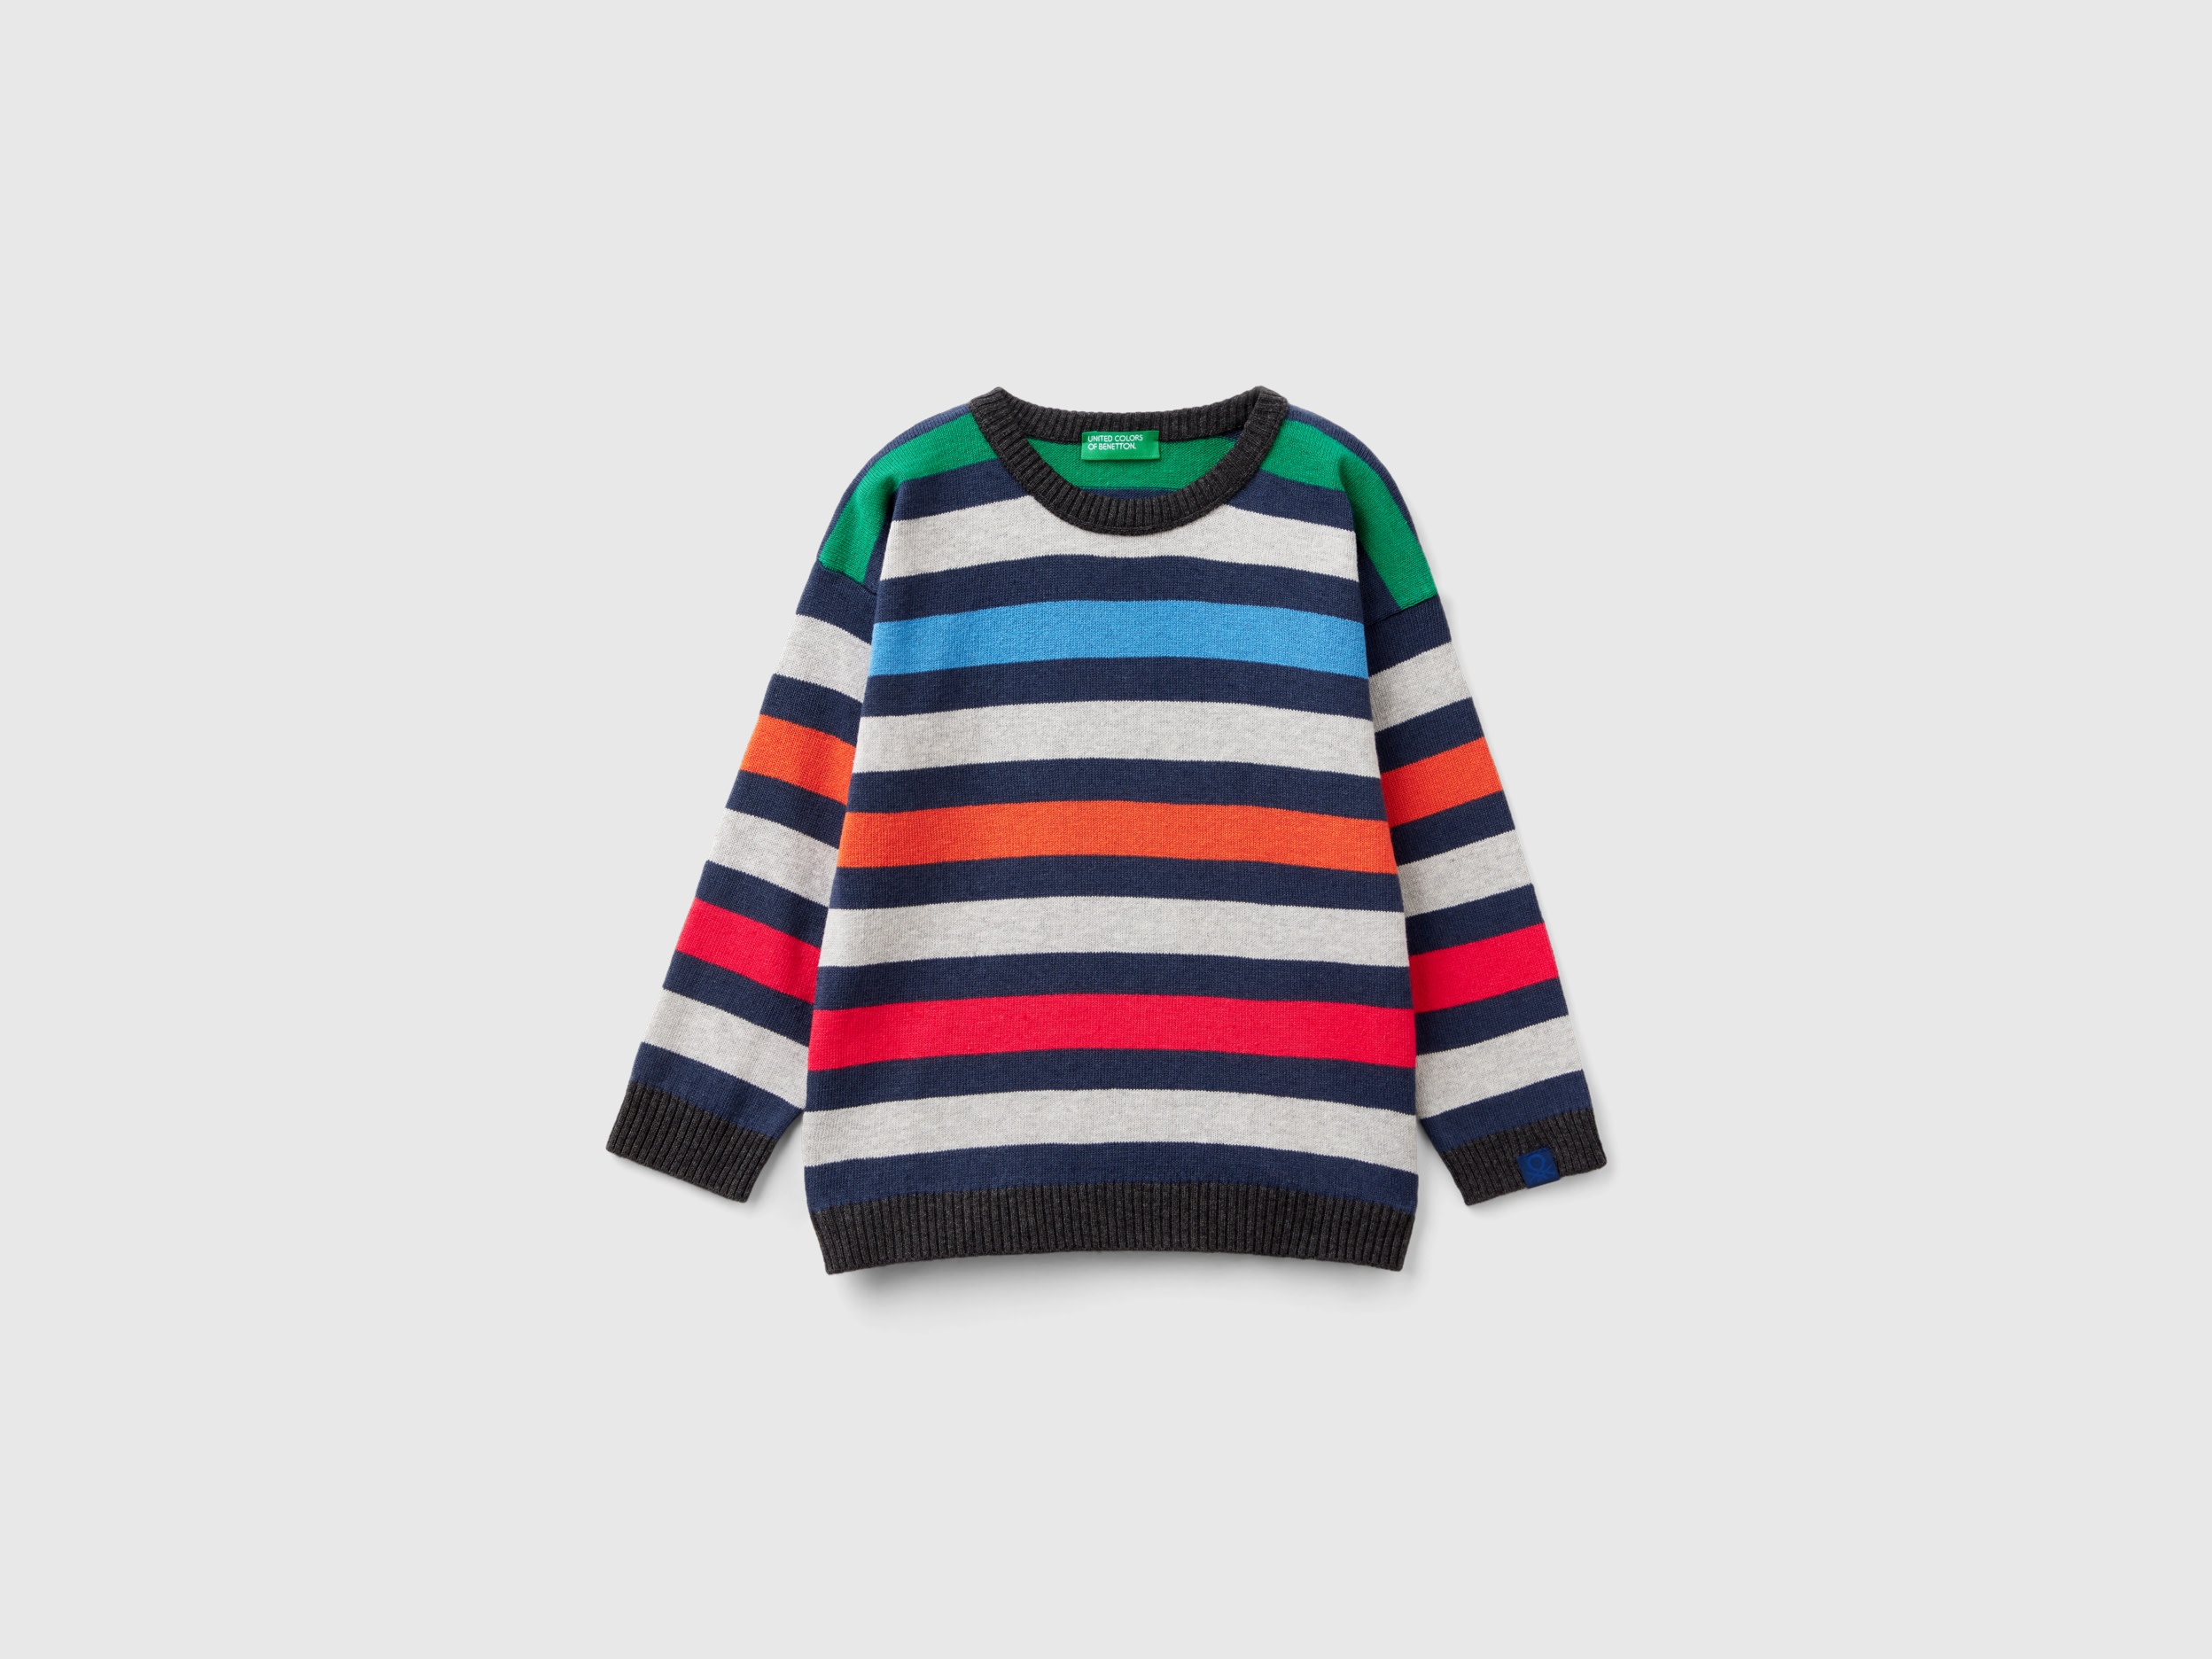 Image of Benetton, Striped Sweater, size 110, Multi-color, Kids